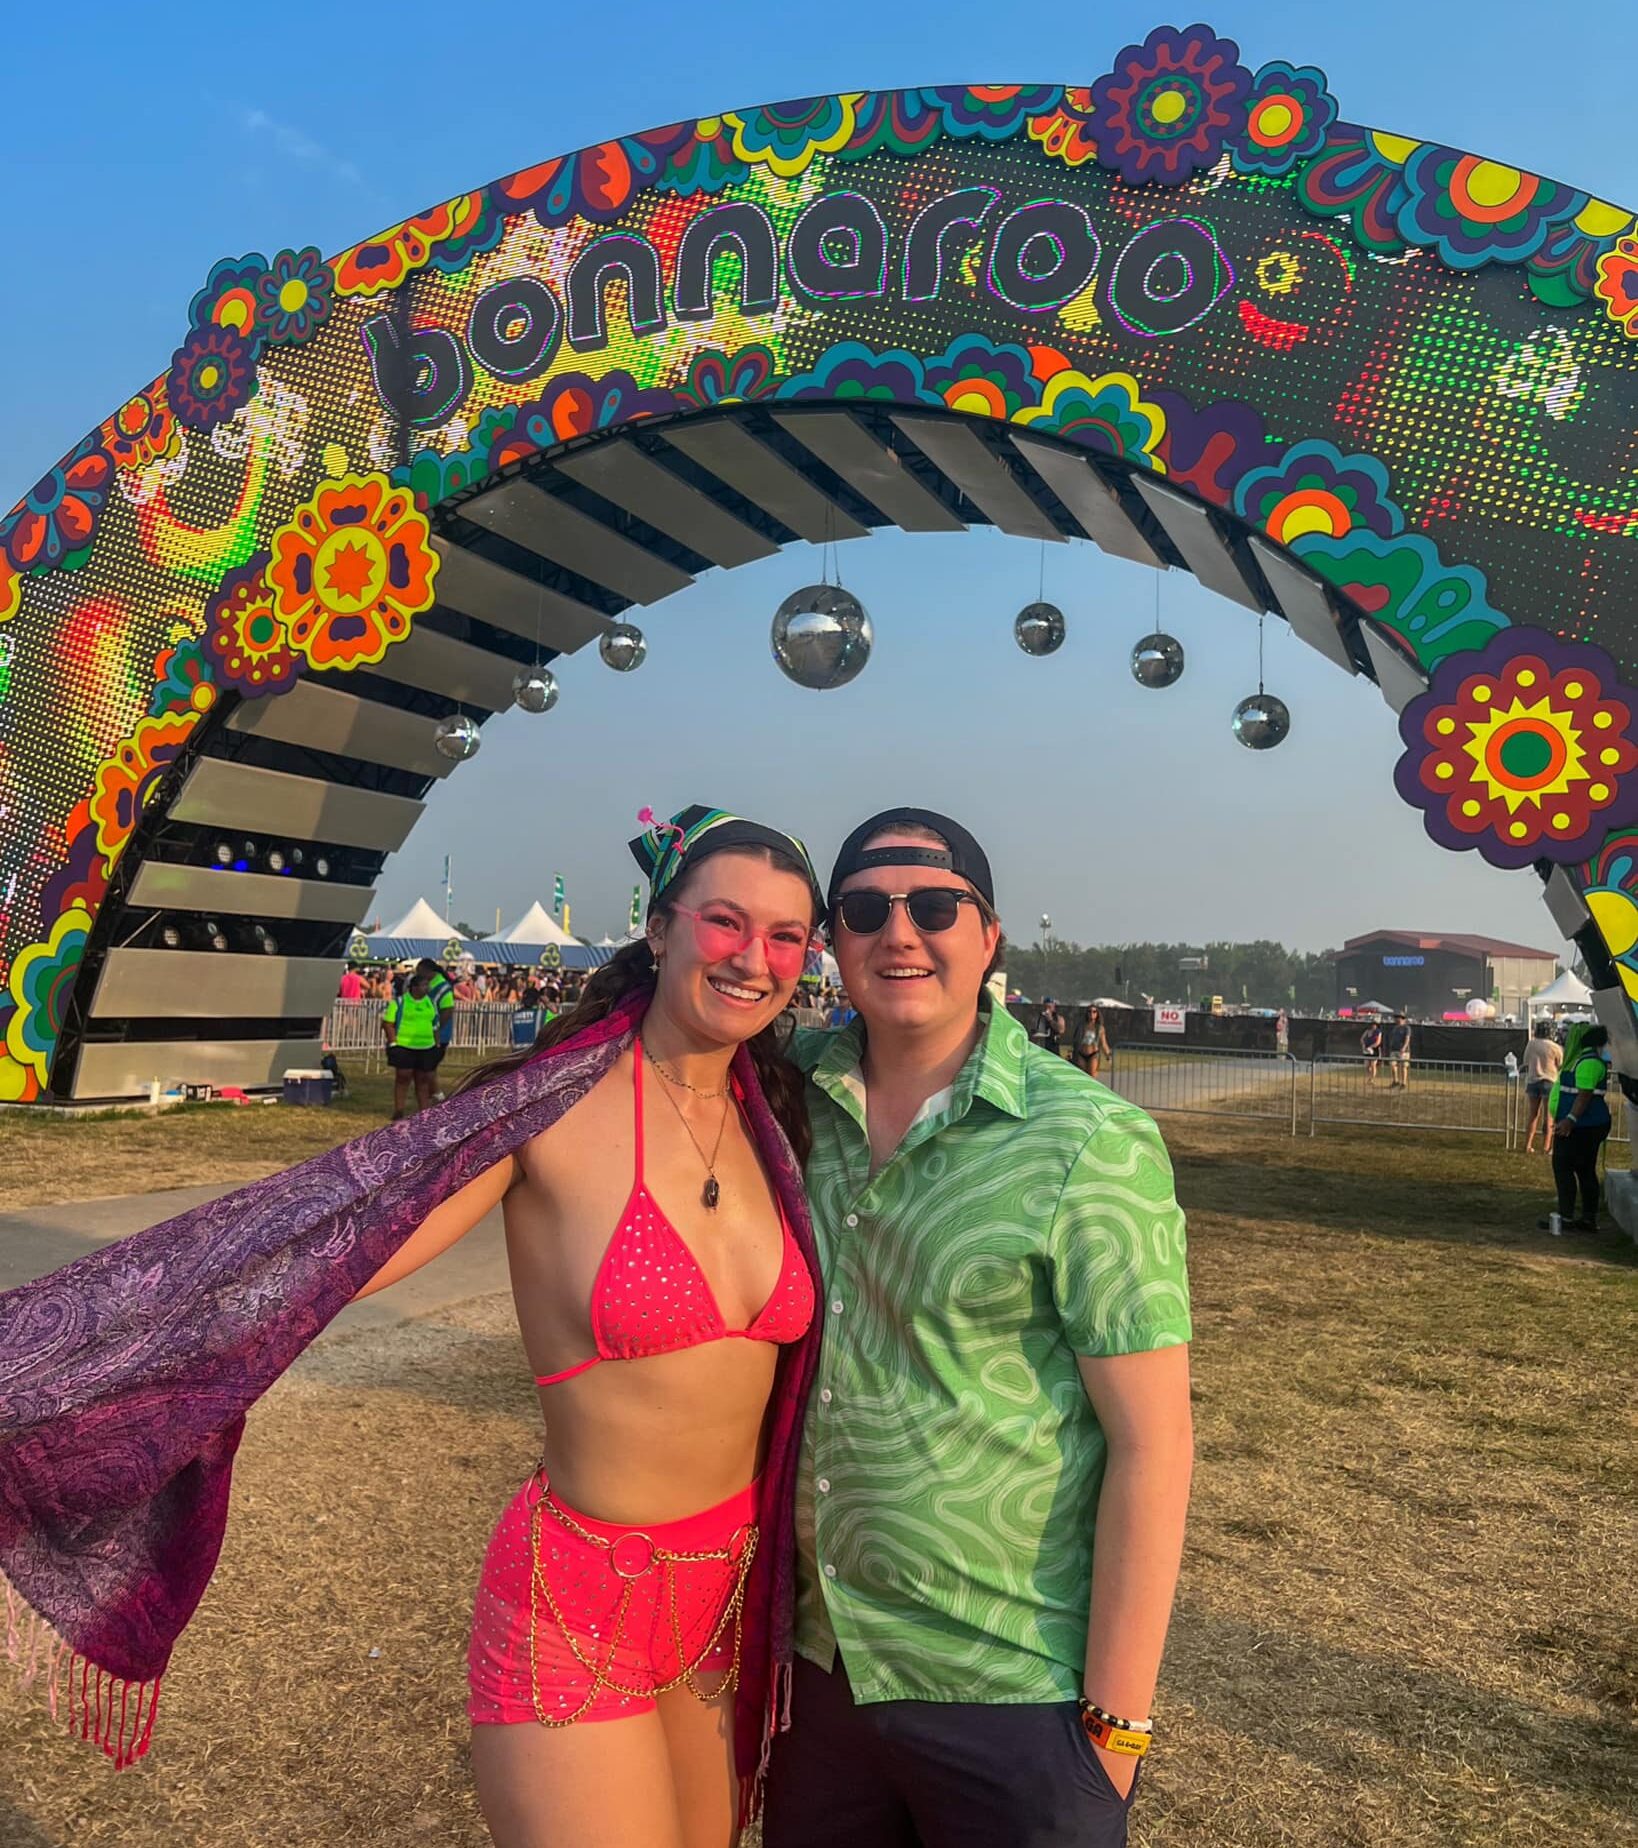 10 Reasons To Attend Bonnaroo